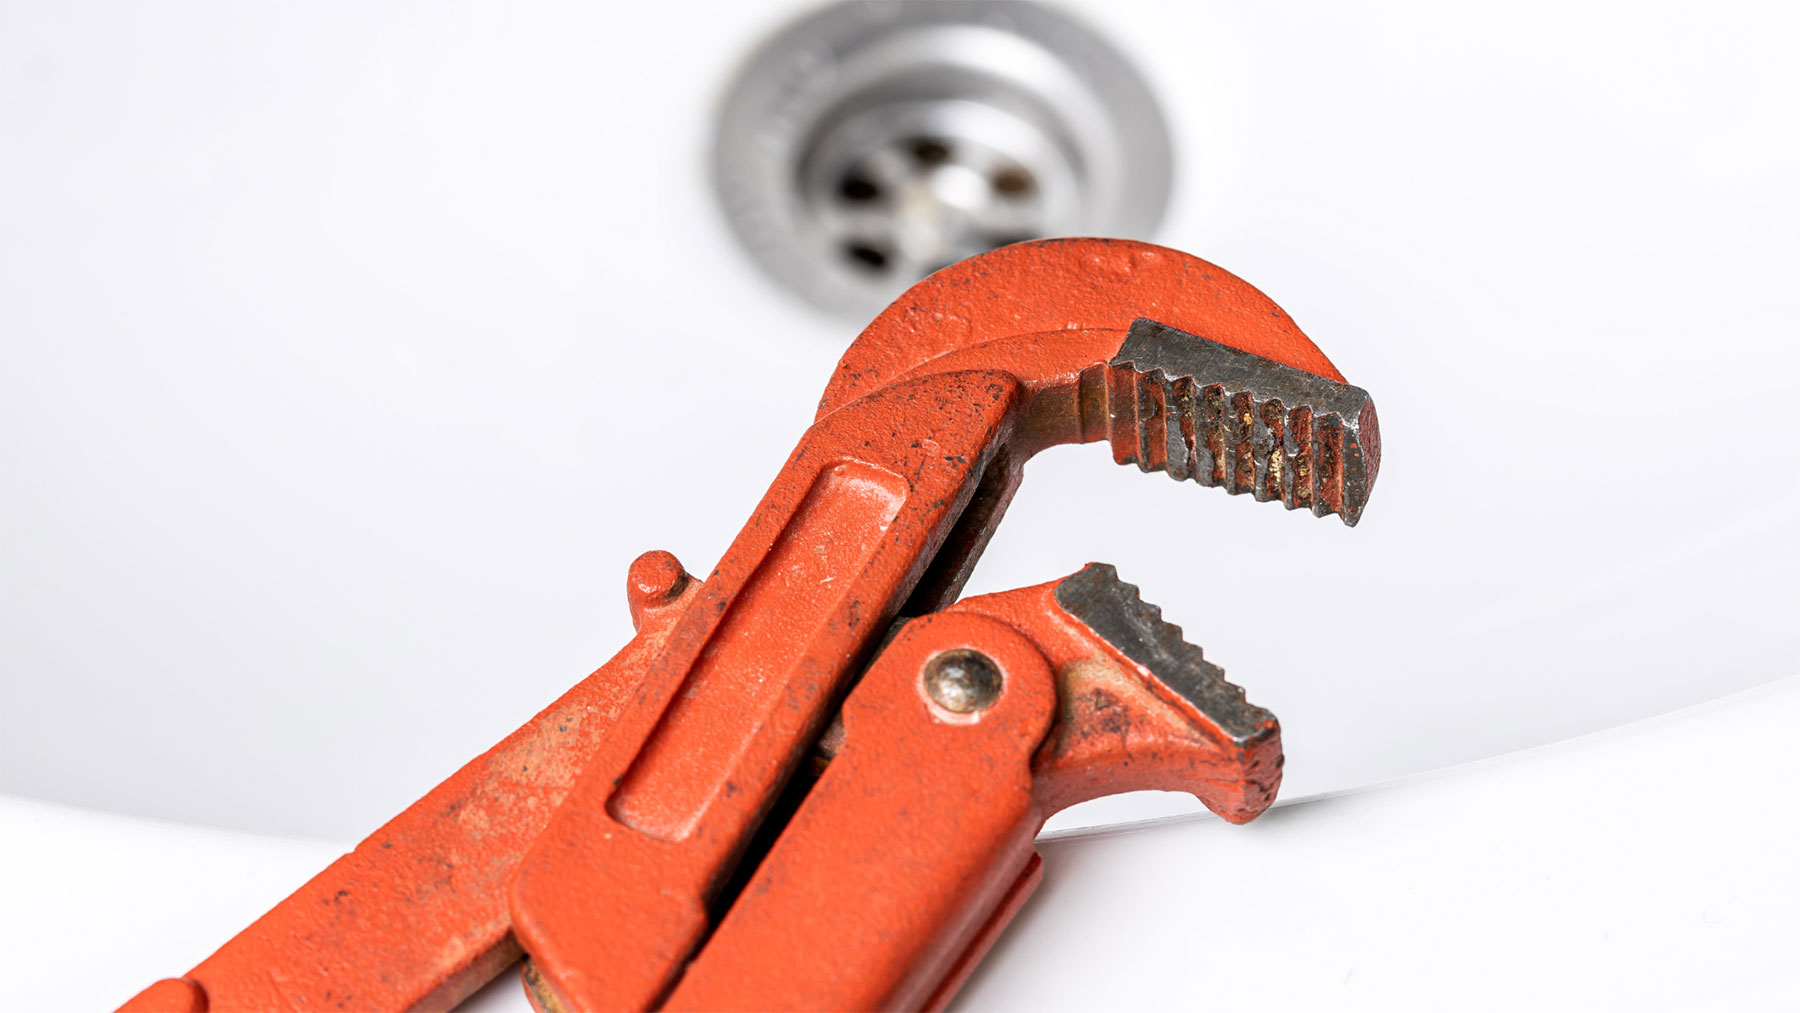 Close-up view of orange pipe wrench leaning against a white sink.